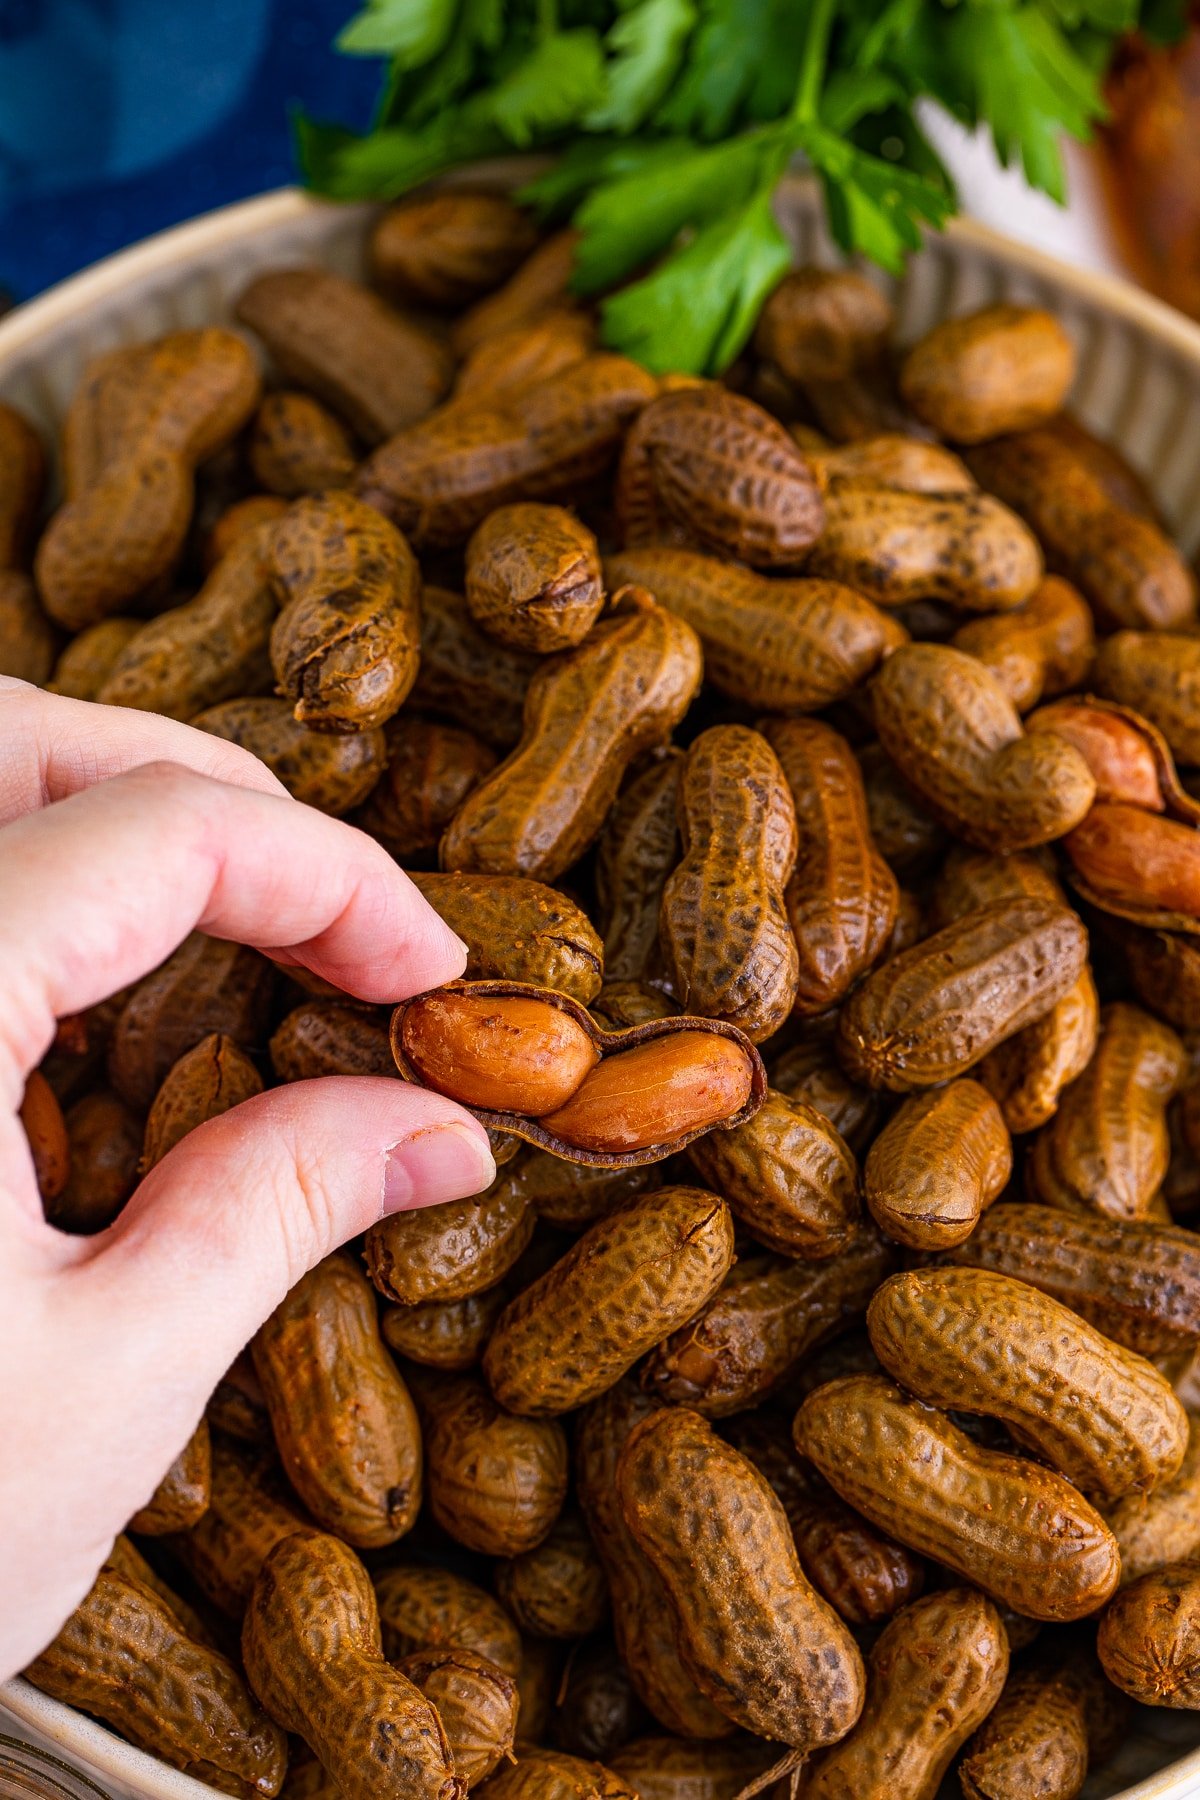 Overhead photo of Boiled Peanuts with hand holding one with half the shell.